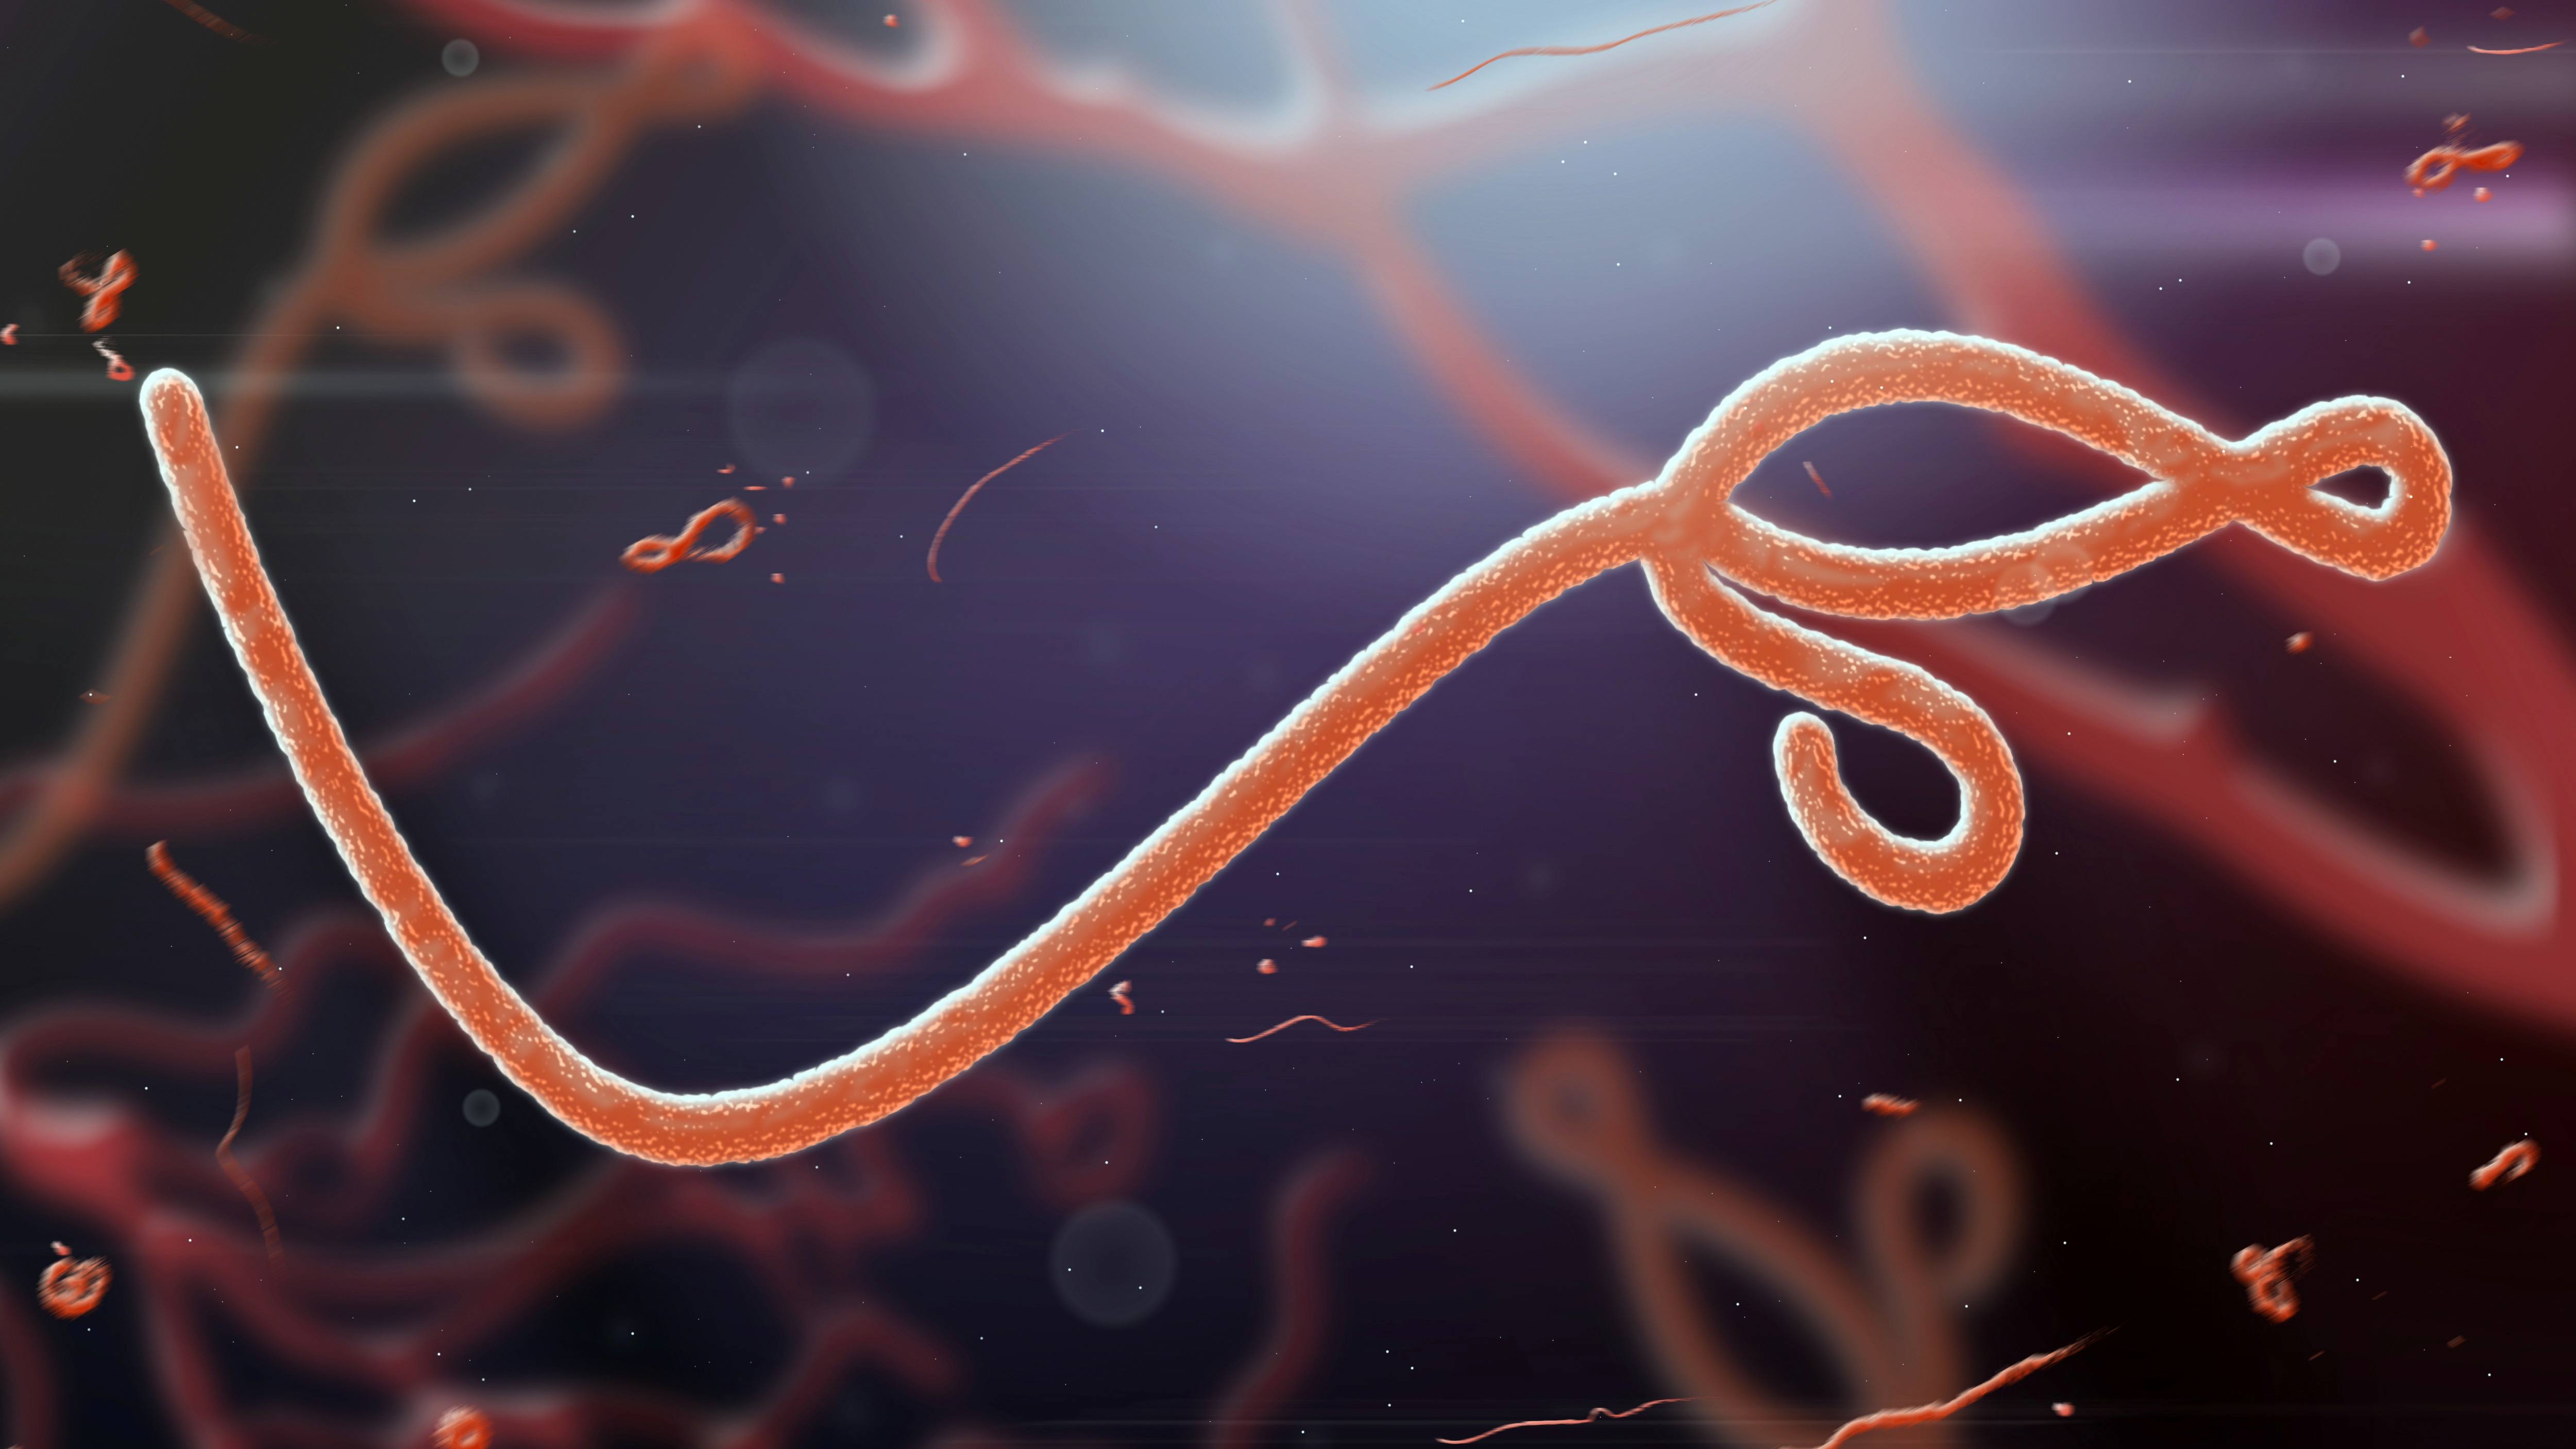 microscopic view of the Ebola virus